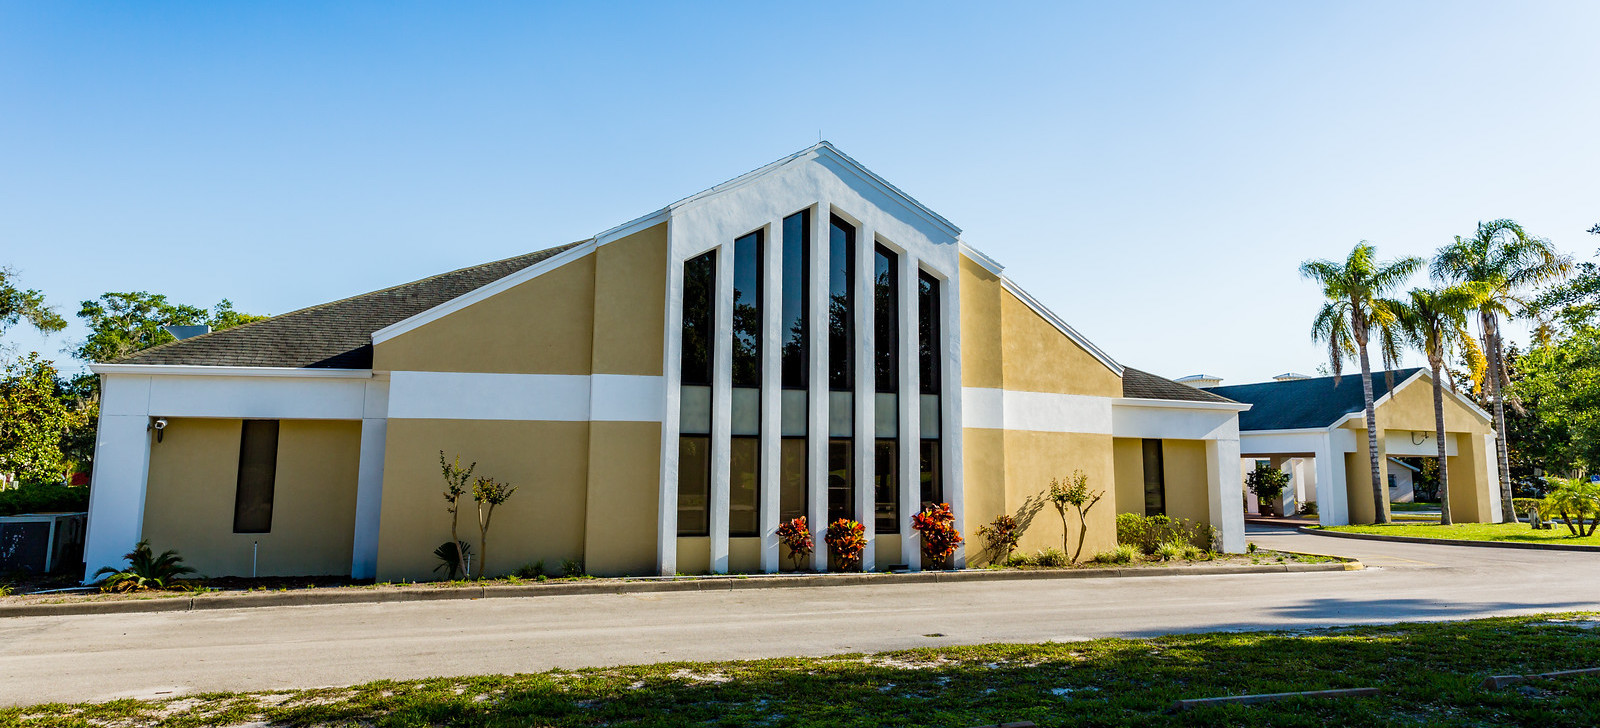 Photo of the outside of a yellow church building